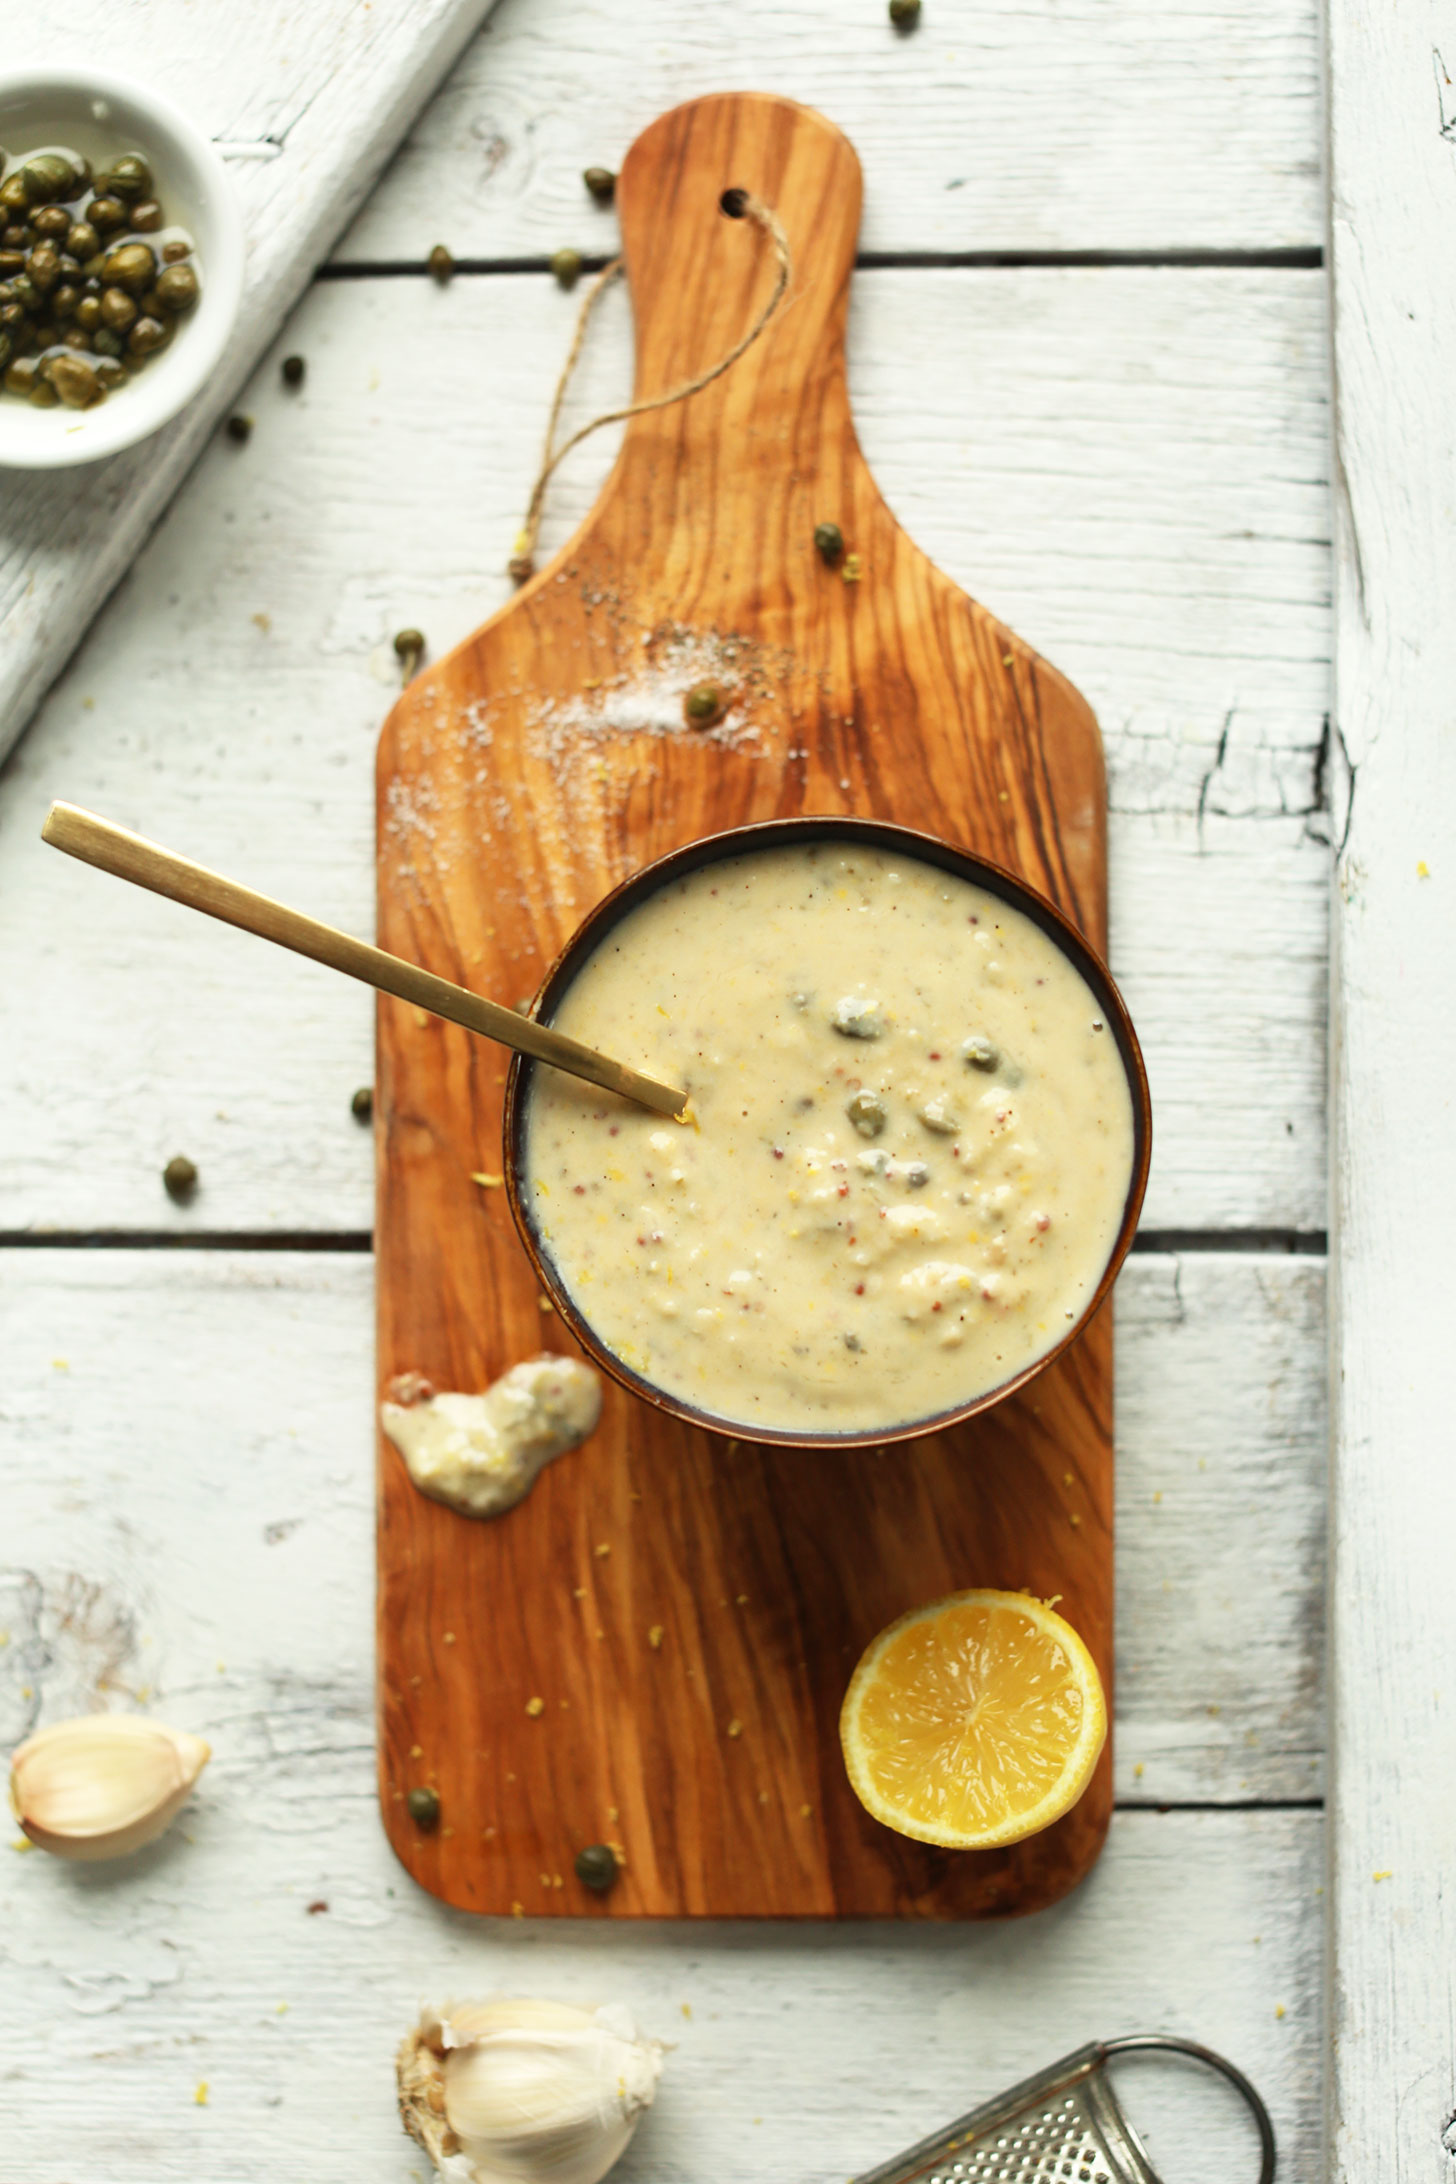 Bowl of our simple vegan caesar dressing recipe made with capers, lemon, and dijon